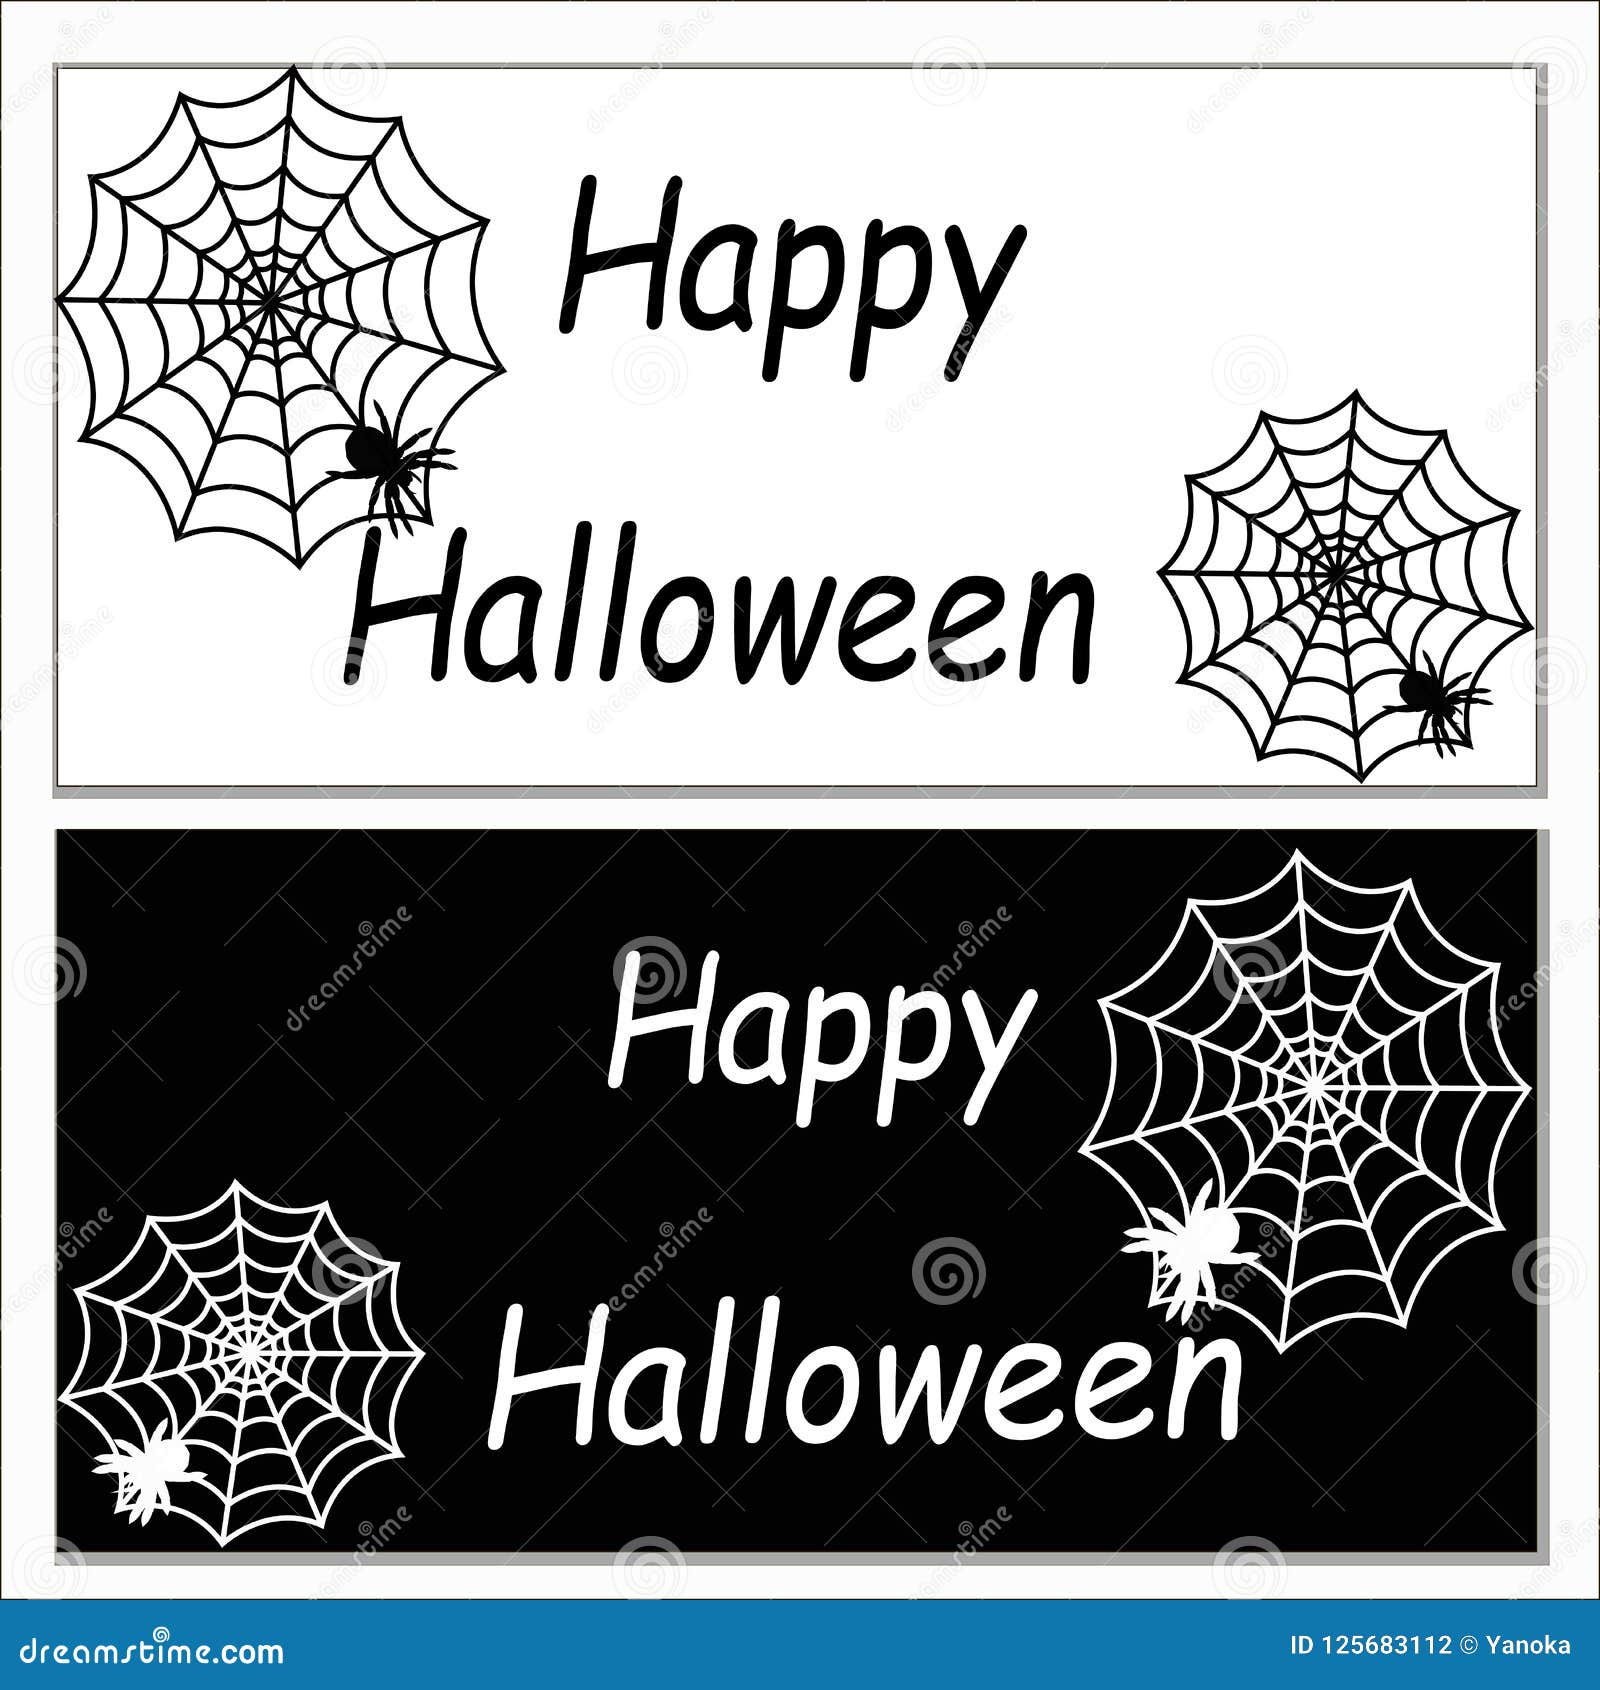 Spooky Spiders and Spider Web Halloween Decor Vintage Halloween Poster Print